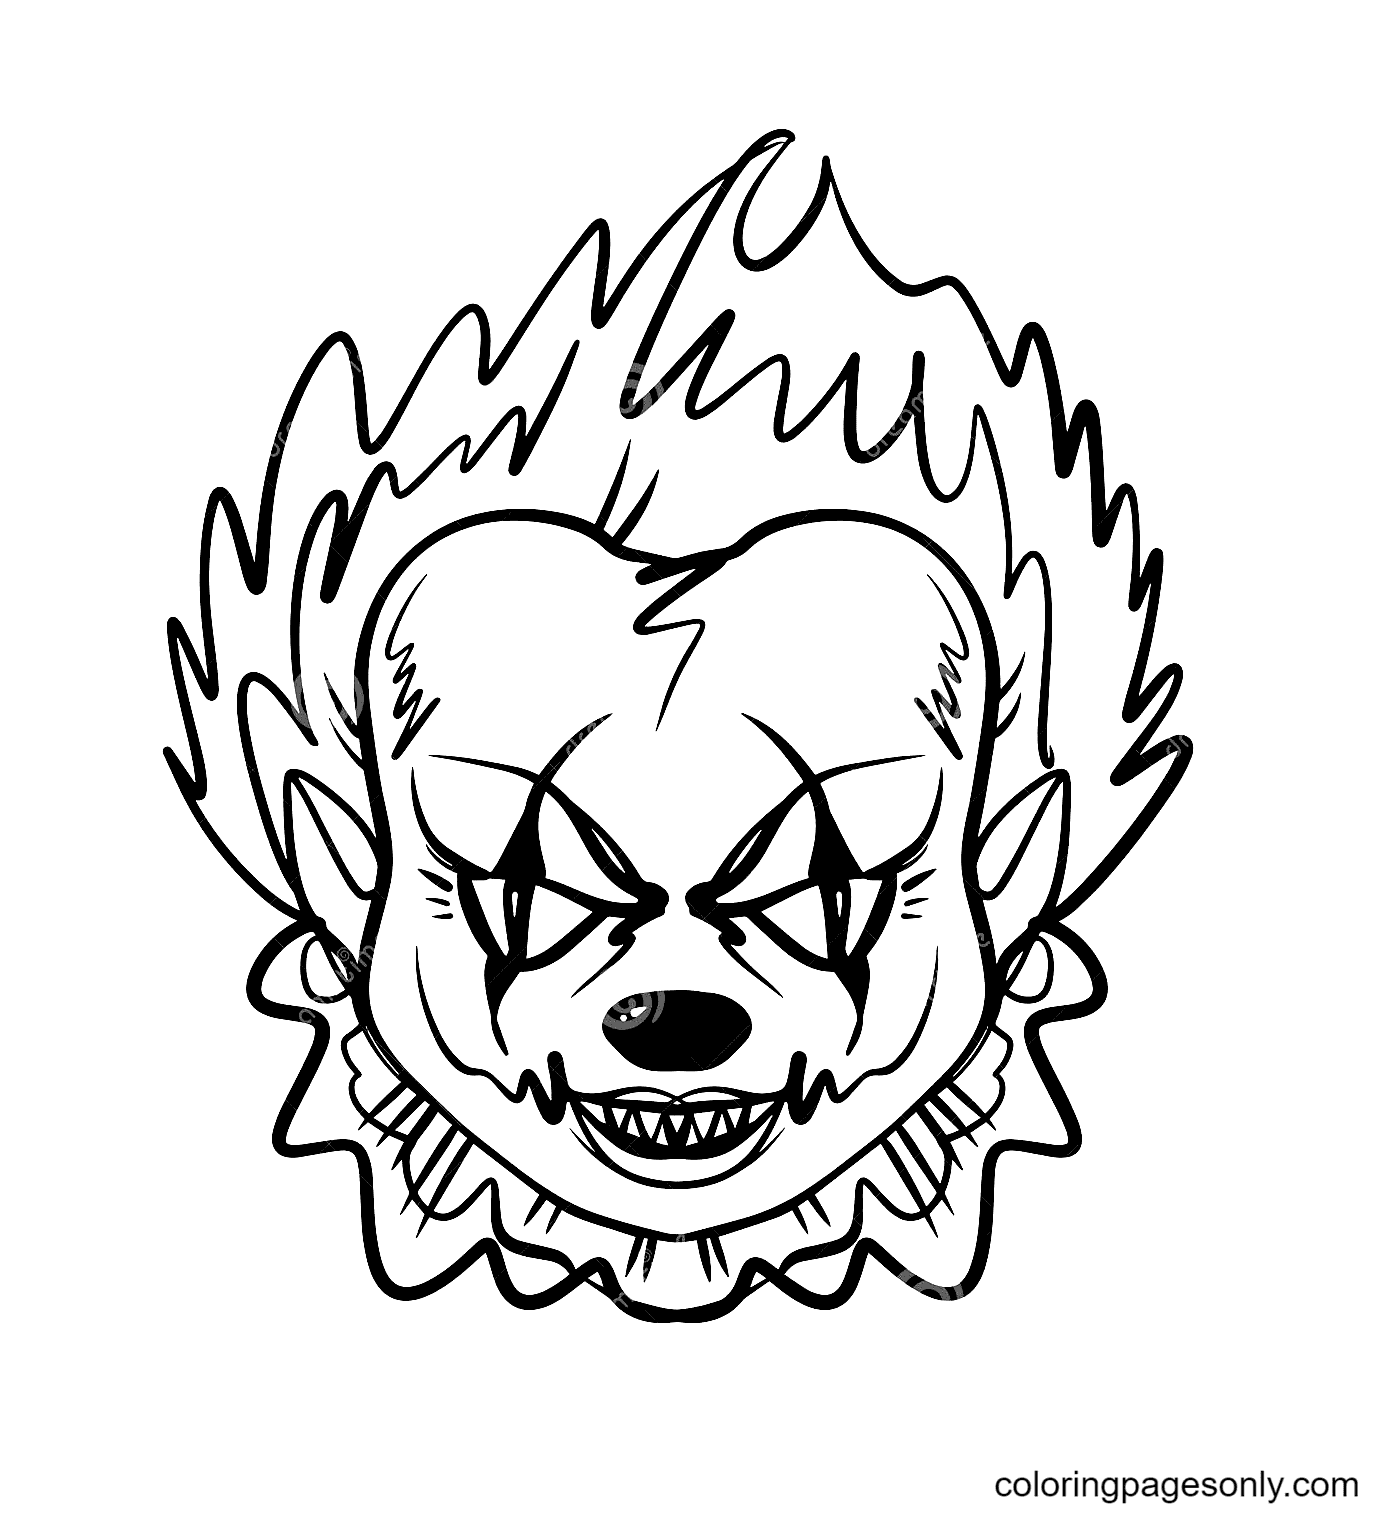 Halloween Masks Coloring Pages - Coloring Pages For Kids And Adults